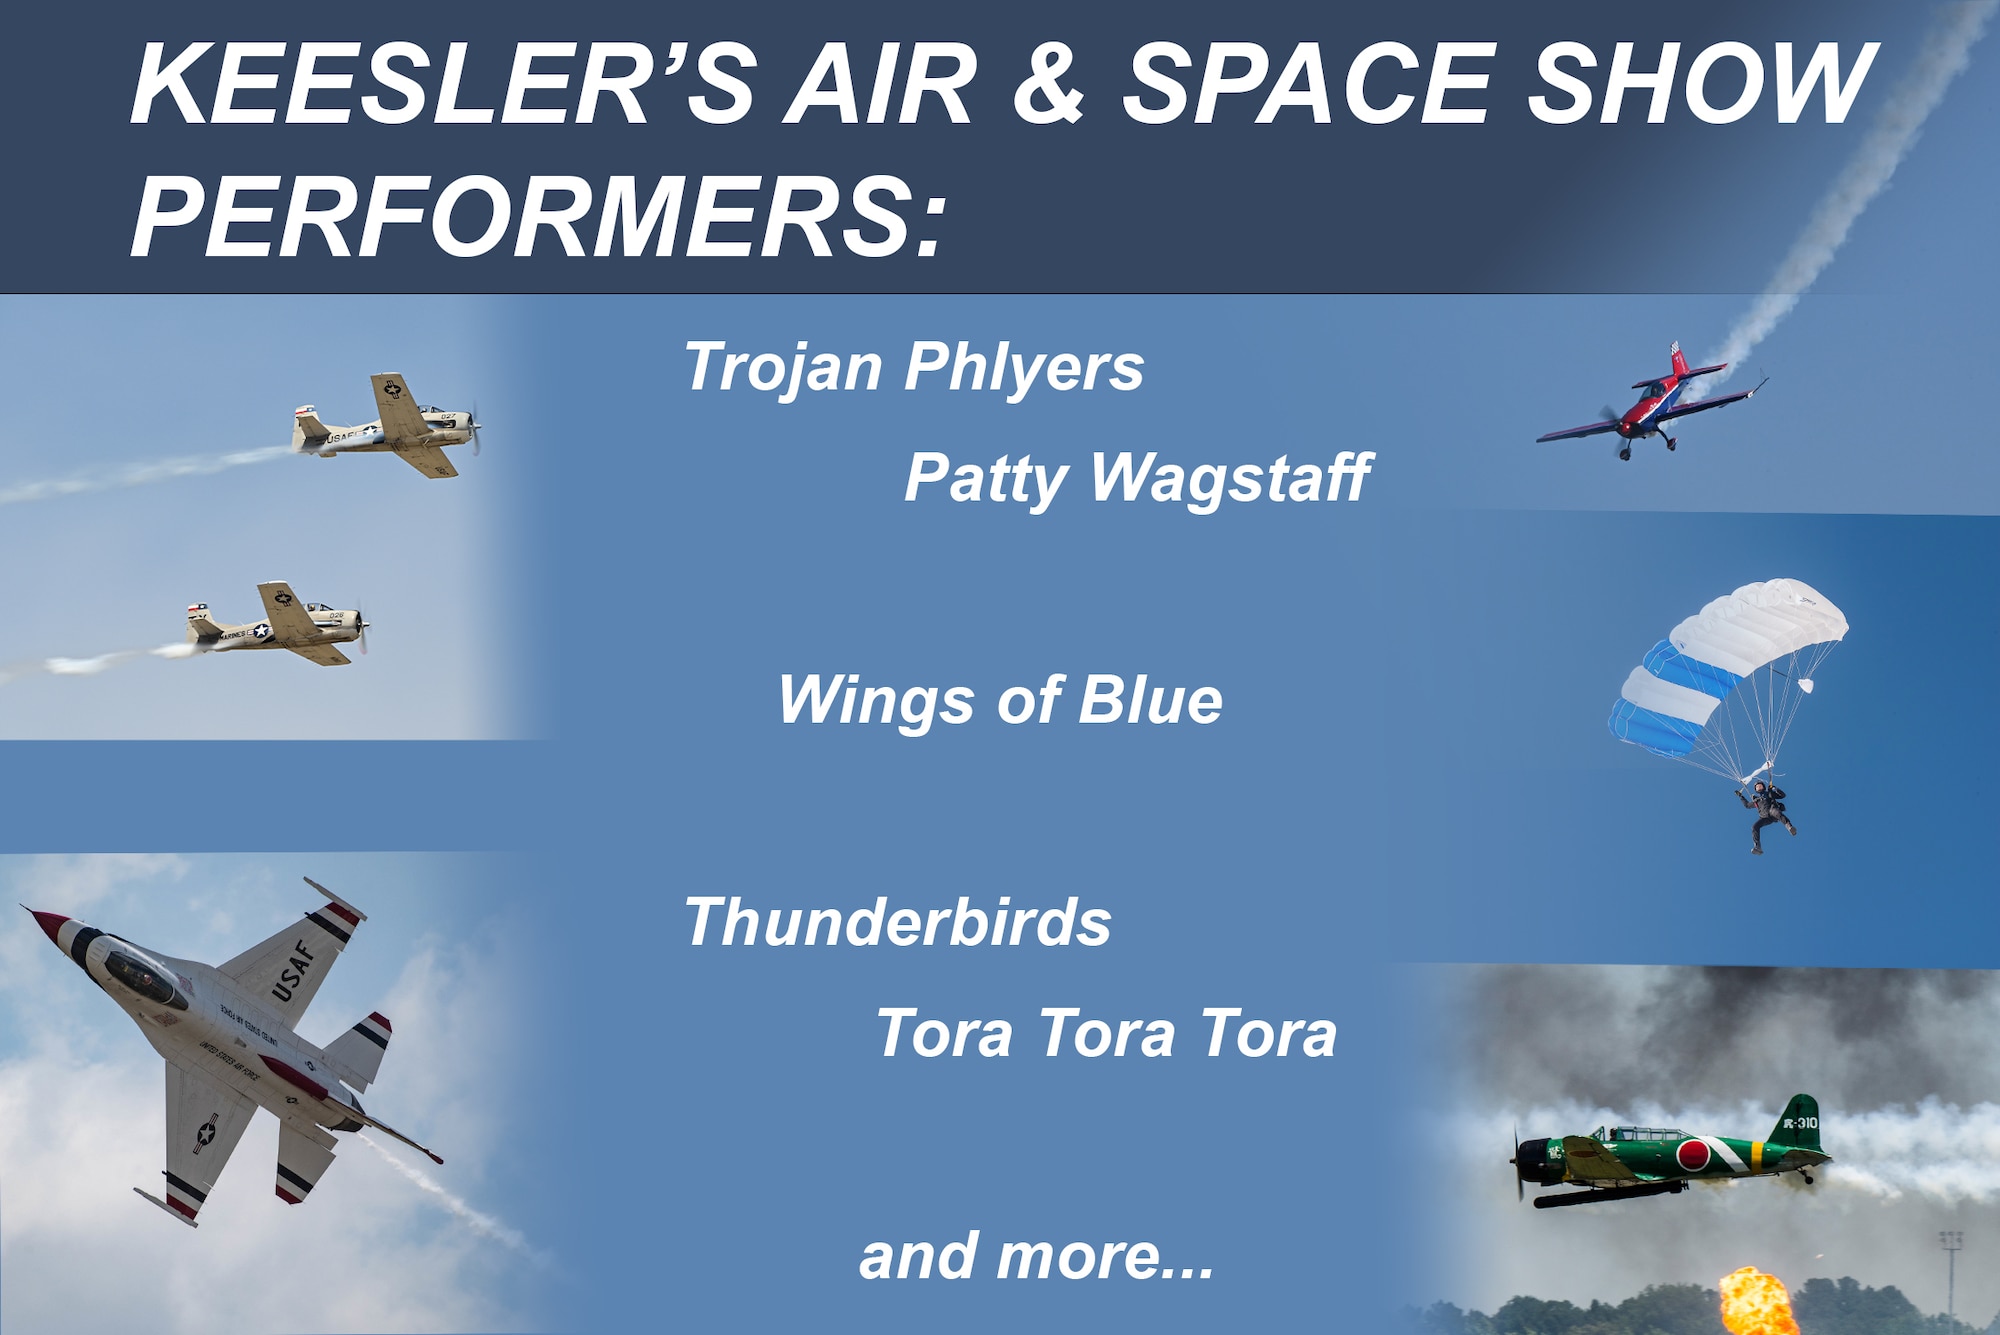 Get ready for Thunder over the Sound Air and Space Show > Keesler Air